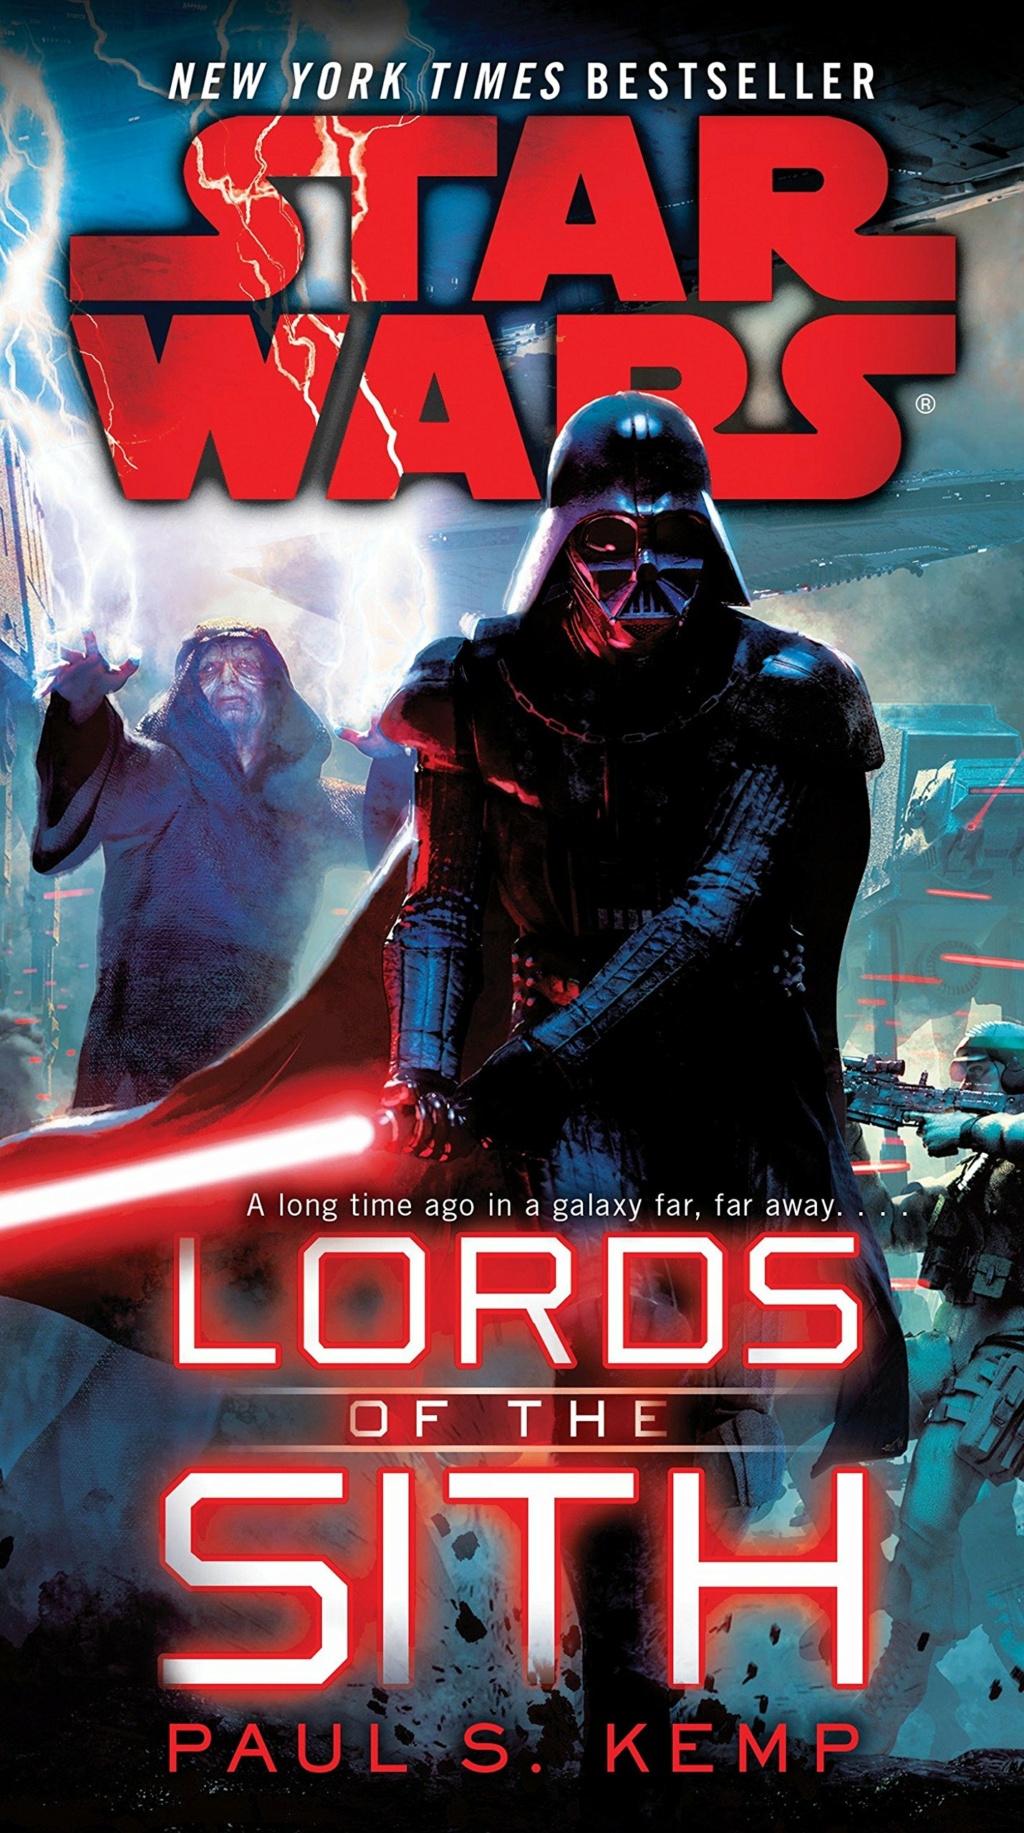 Star Wars Lords of the Sith de Paul S. Kemp Lords_10